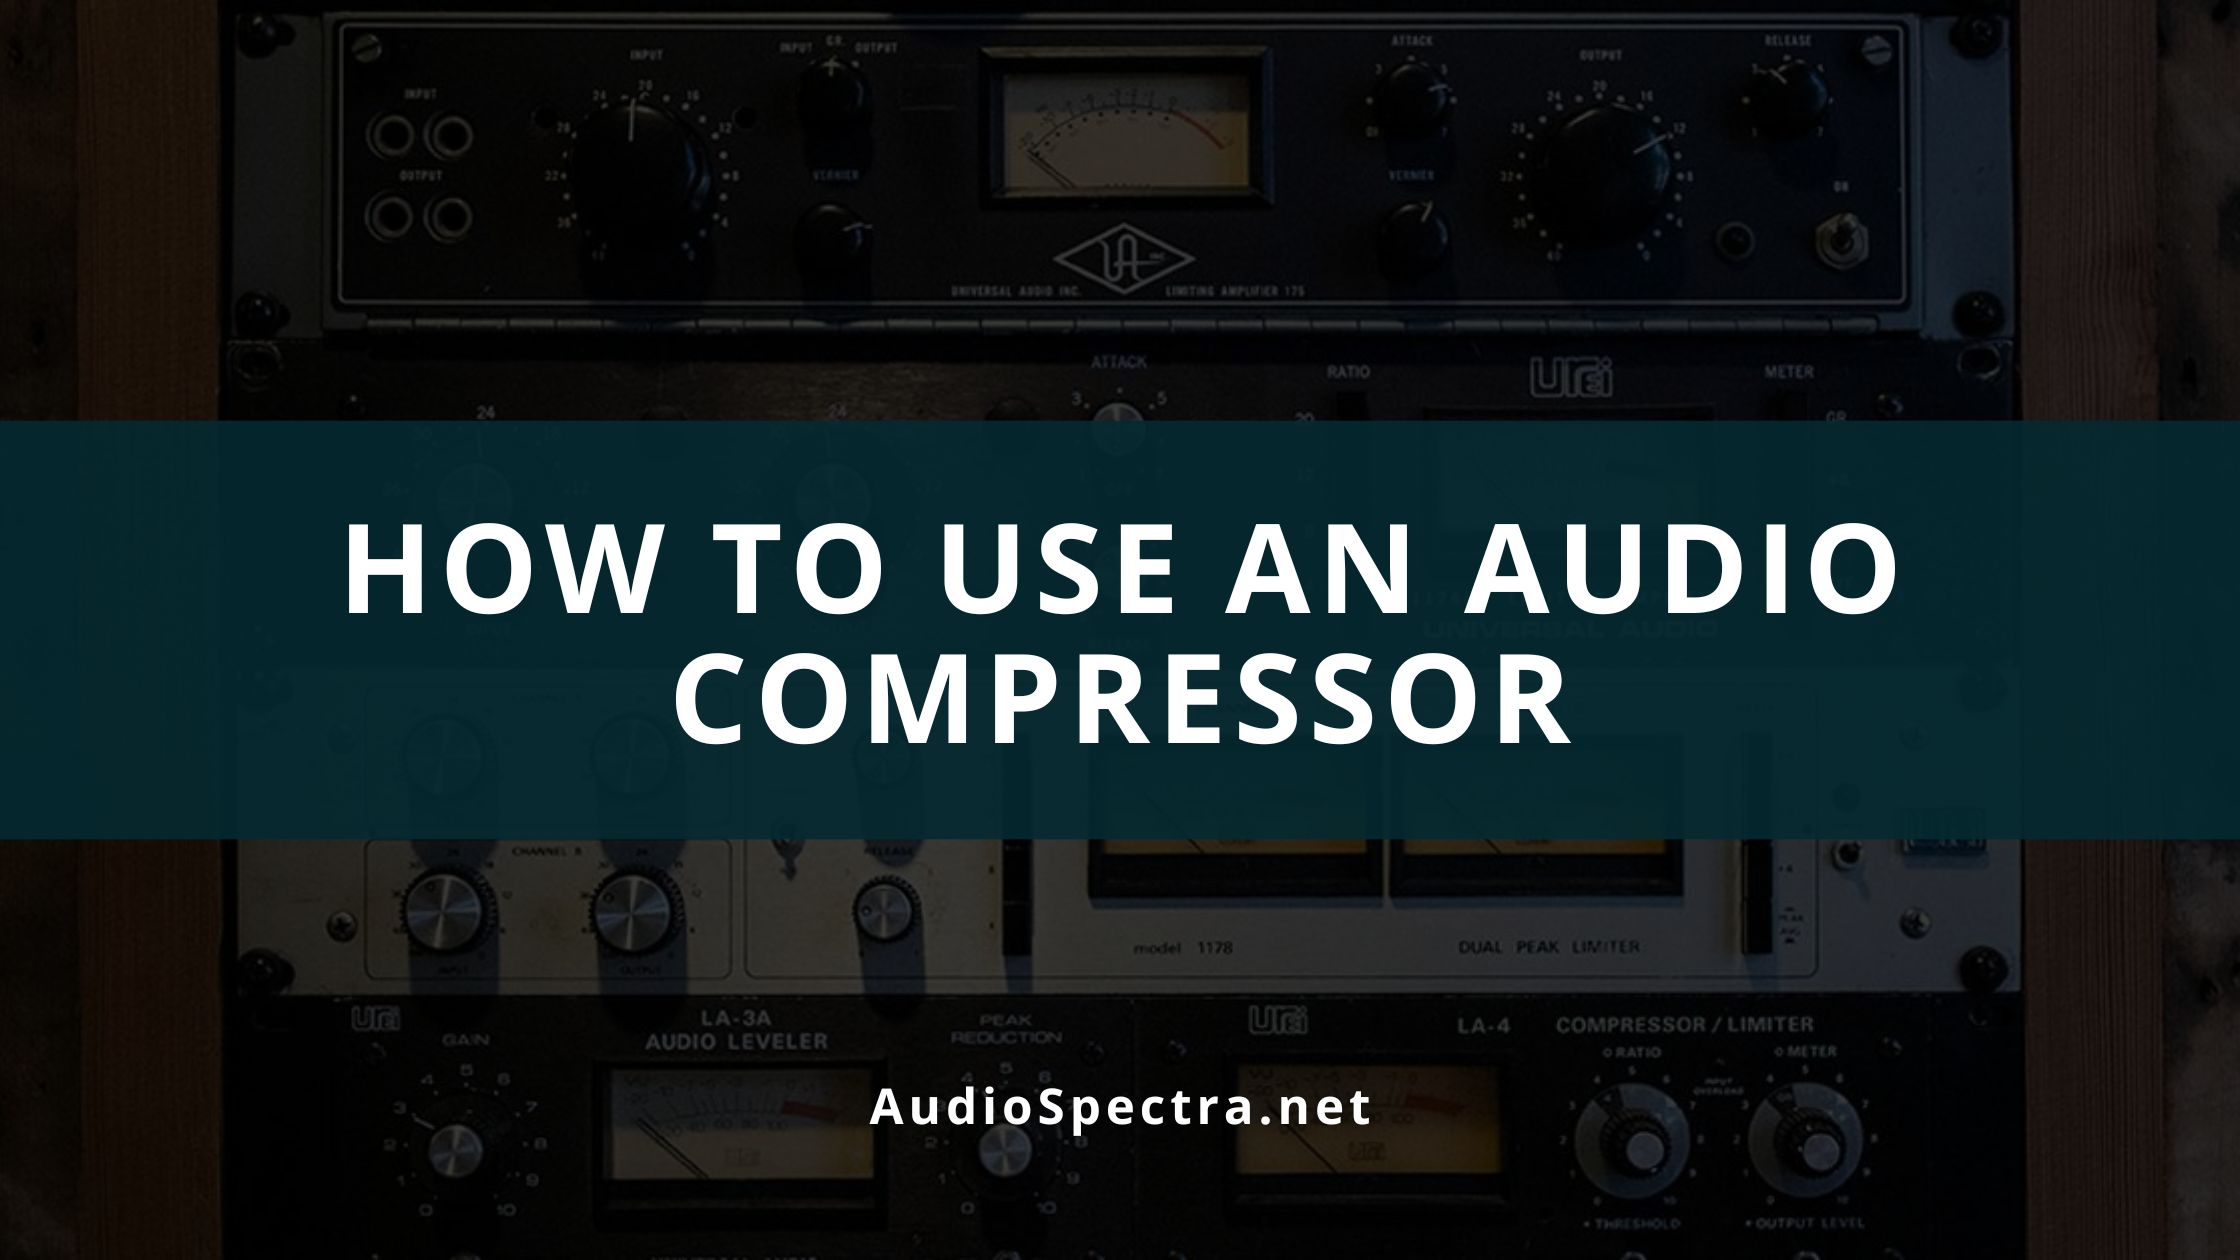 How To Use an Audio Compressor